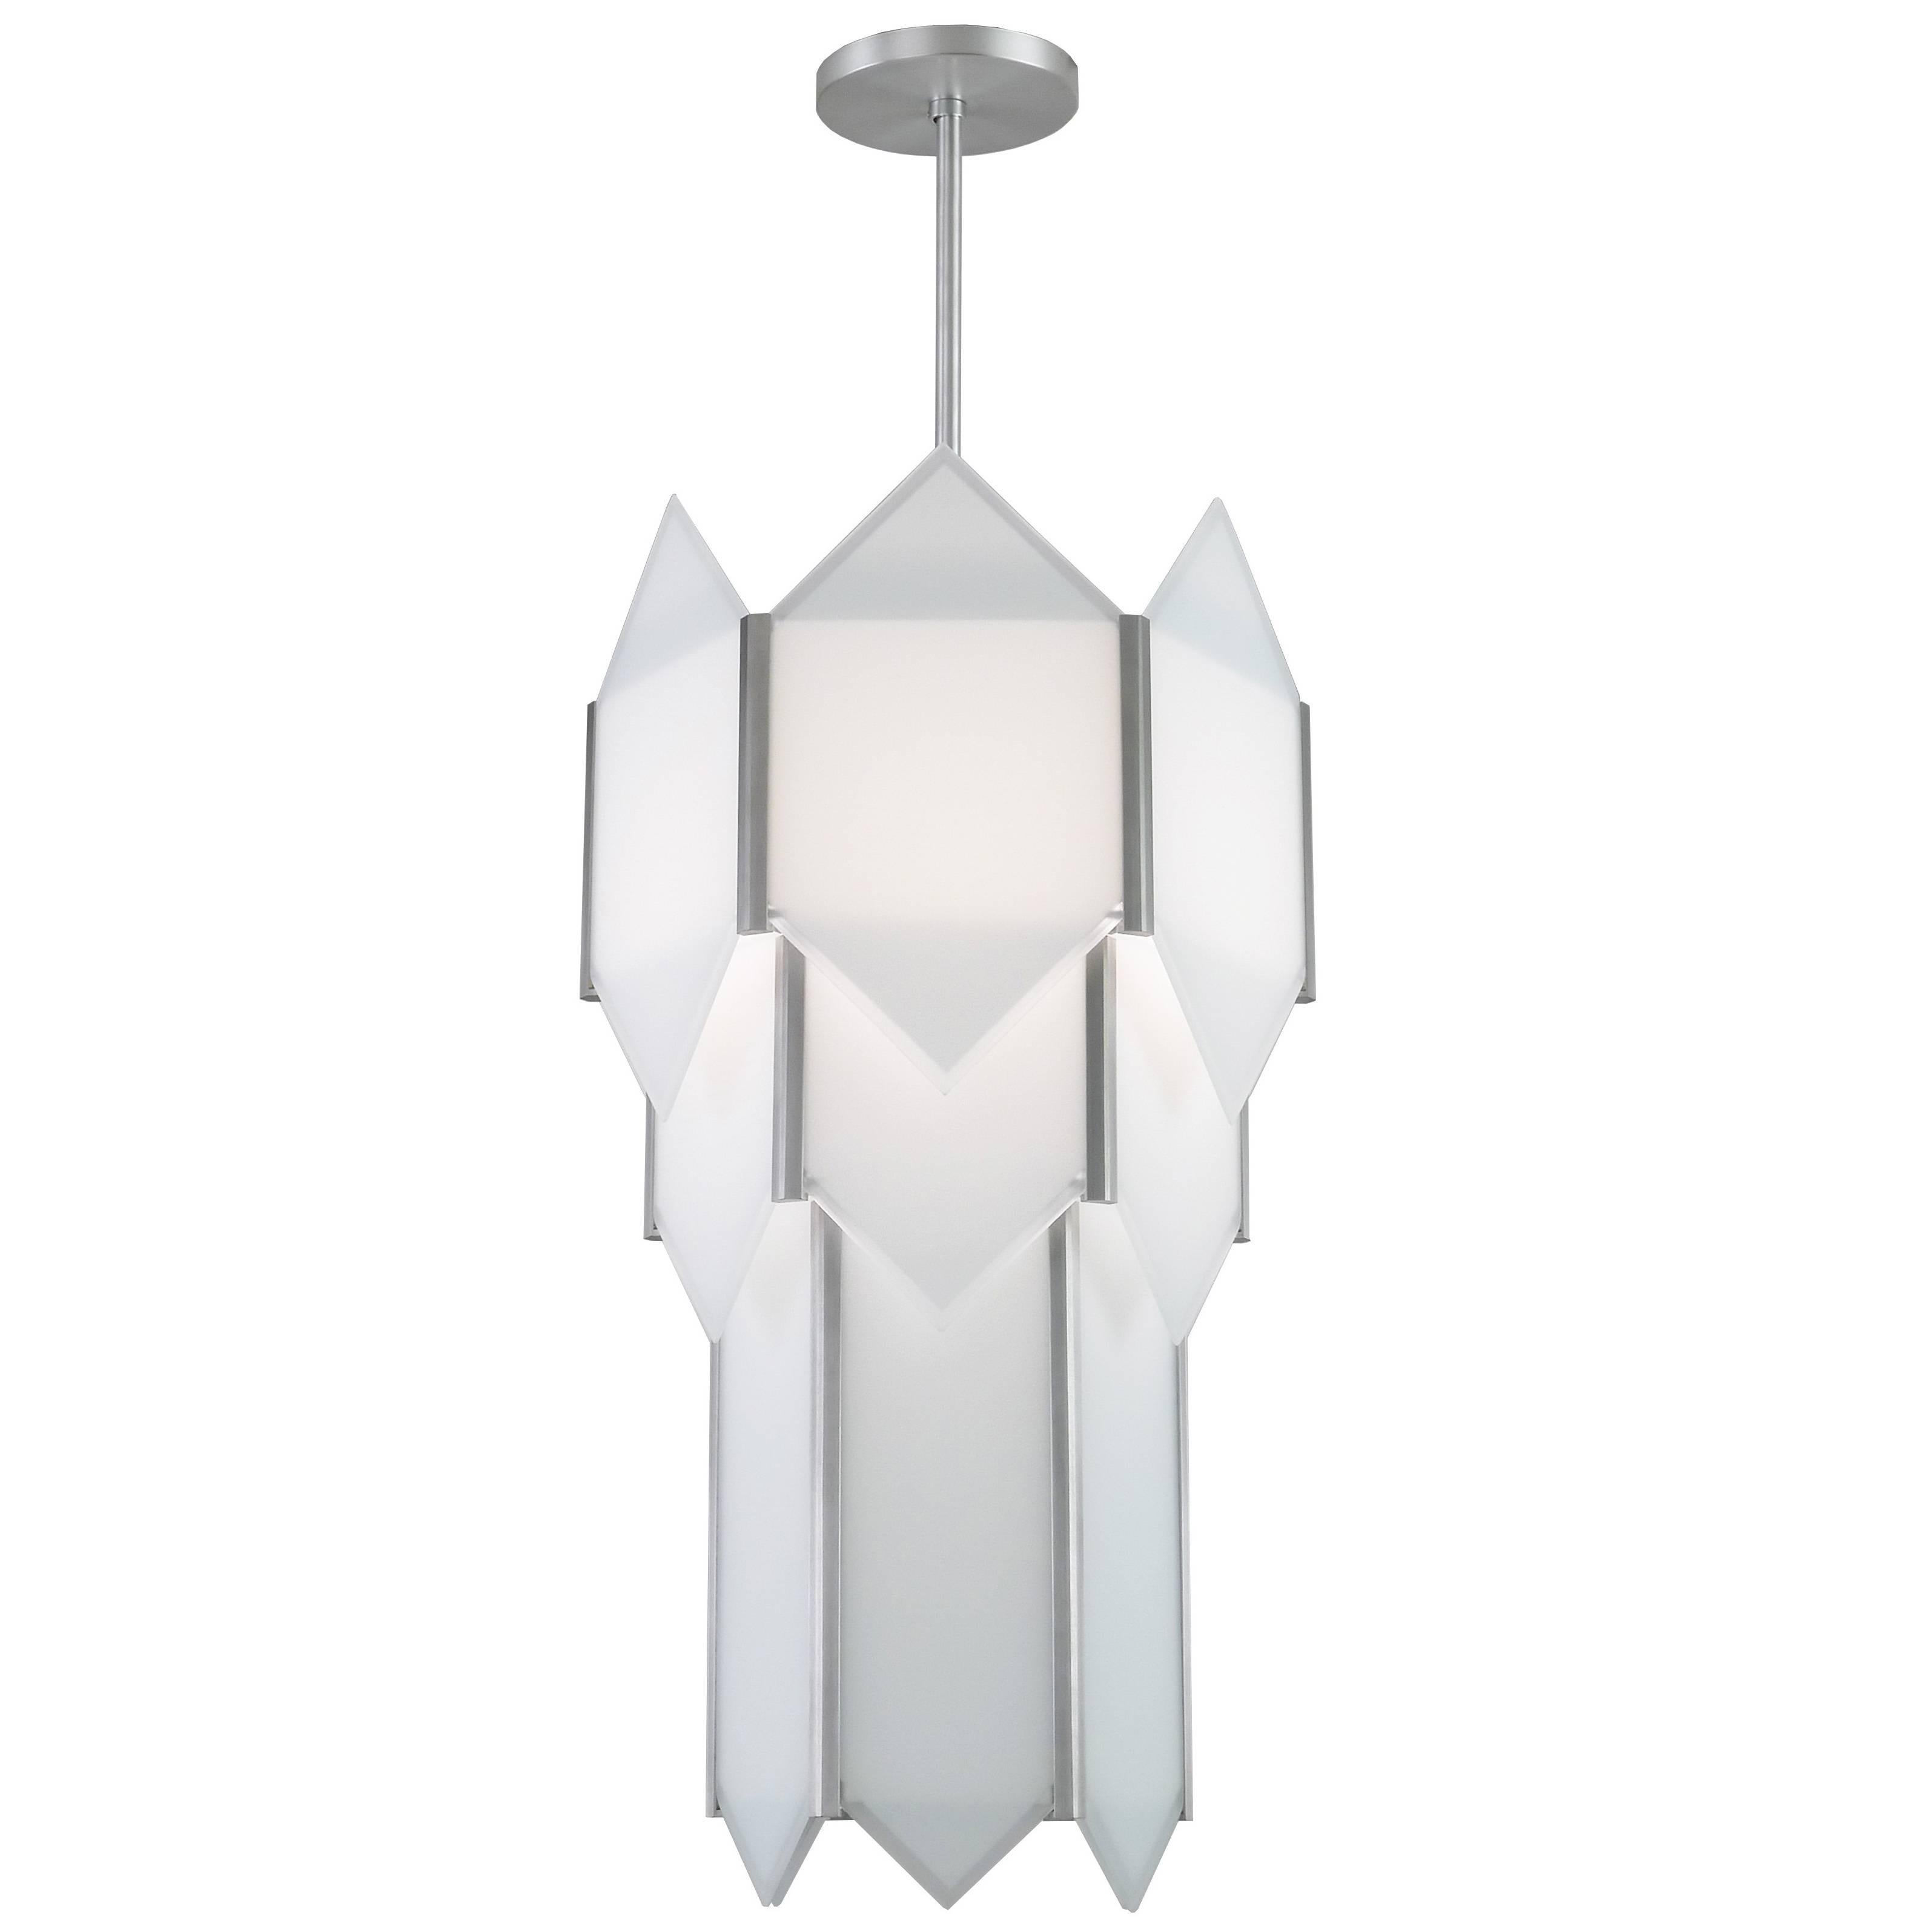 Art Deco Style Skyscraper Chandelier in Stainless Steel with White Glass Panels For Sale